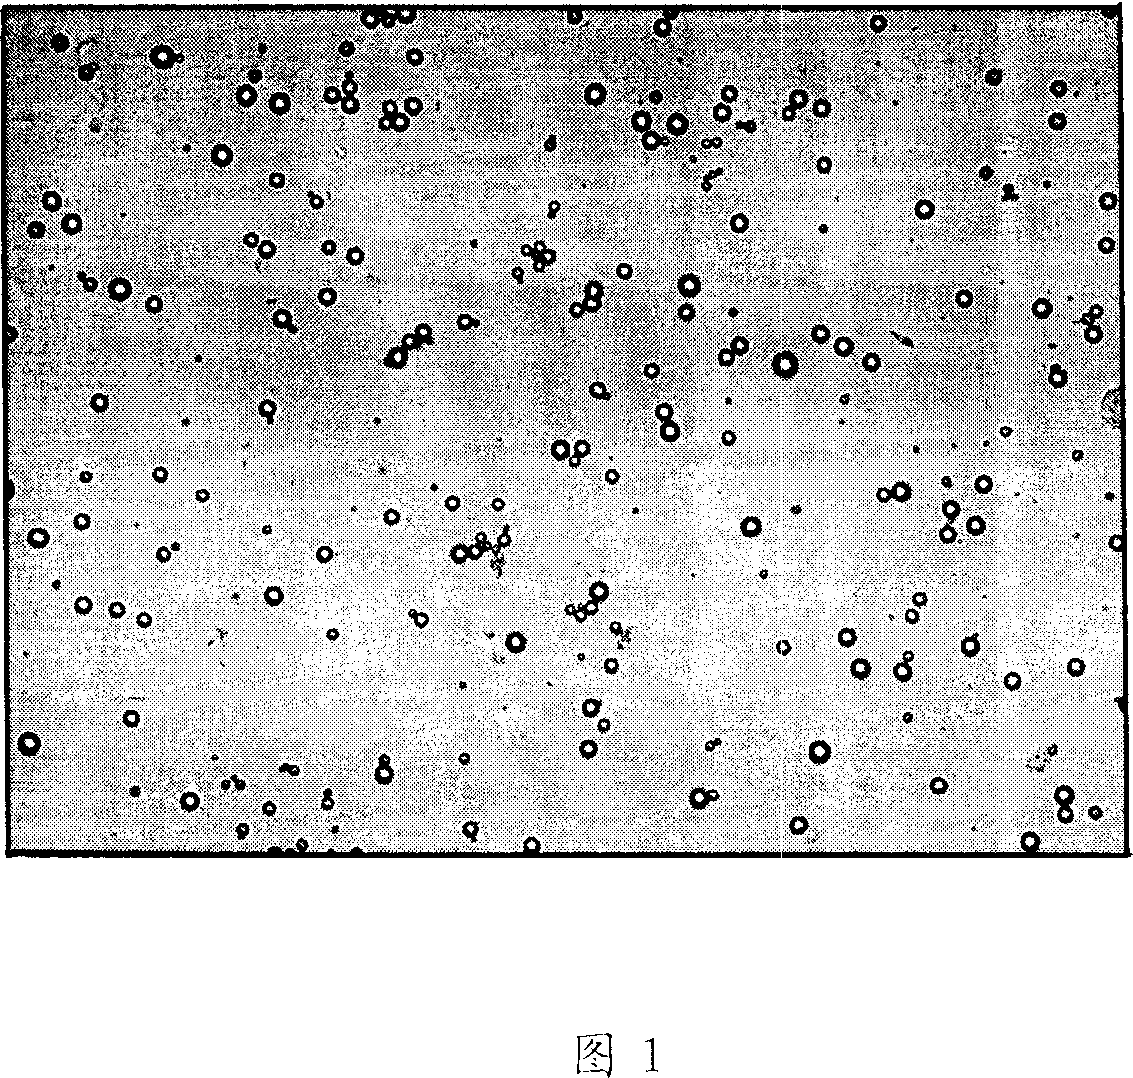 Novel photosensitive agent with function of carrying oxygen